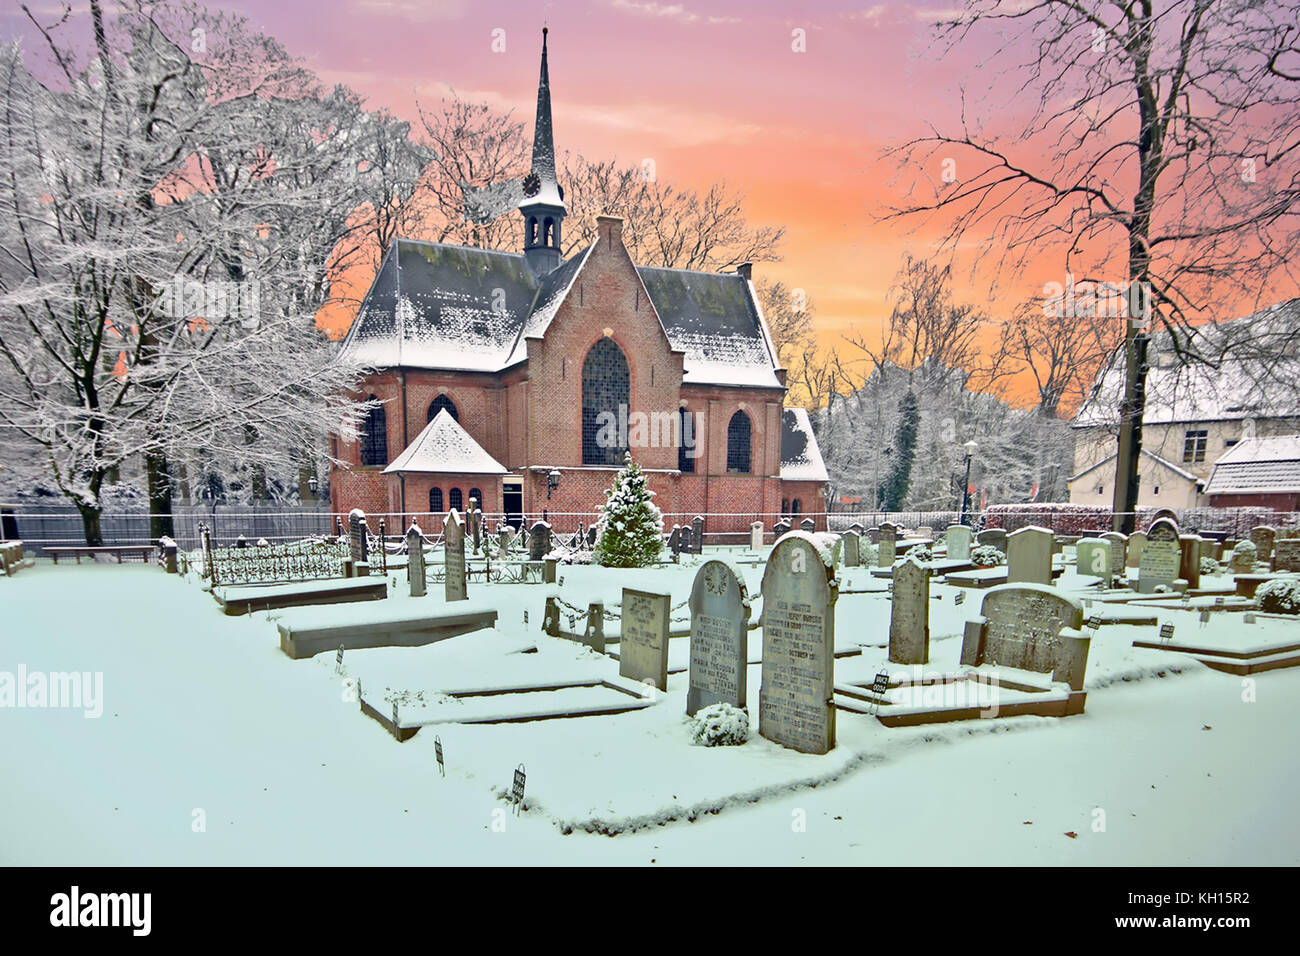 Snowy traditional medieval church in Lage Vuursche the Netherlands at sunset Stock Photo